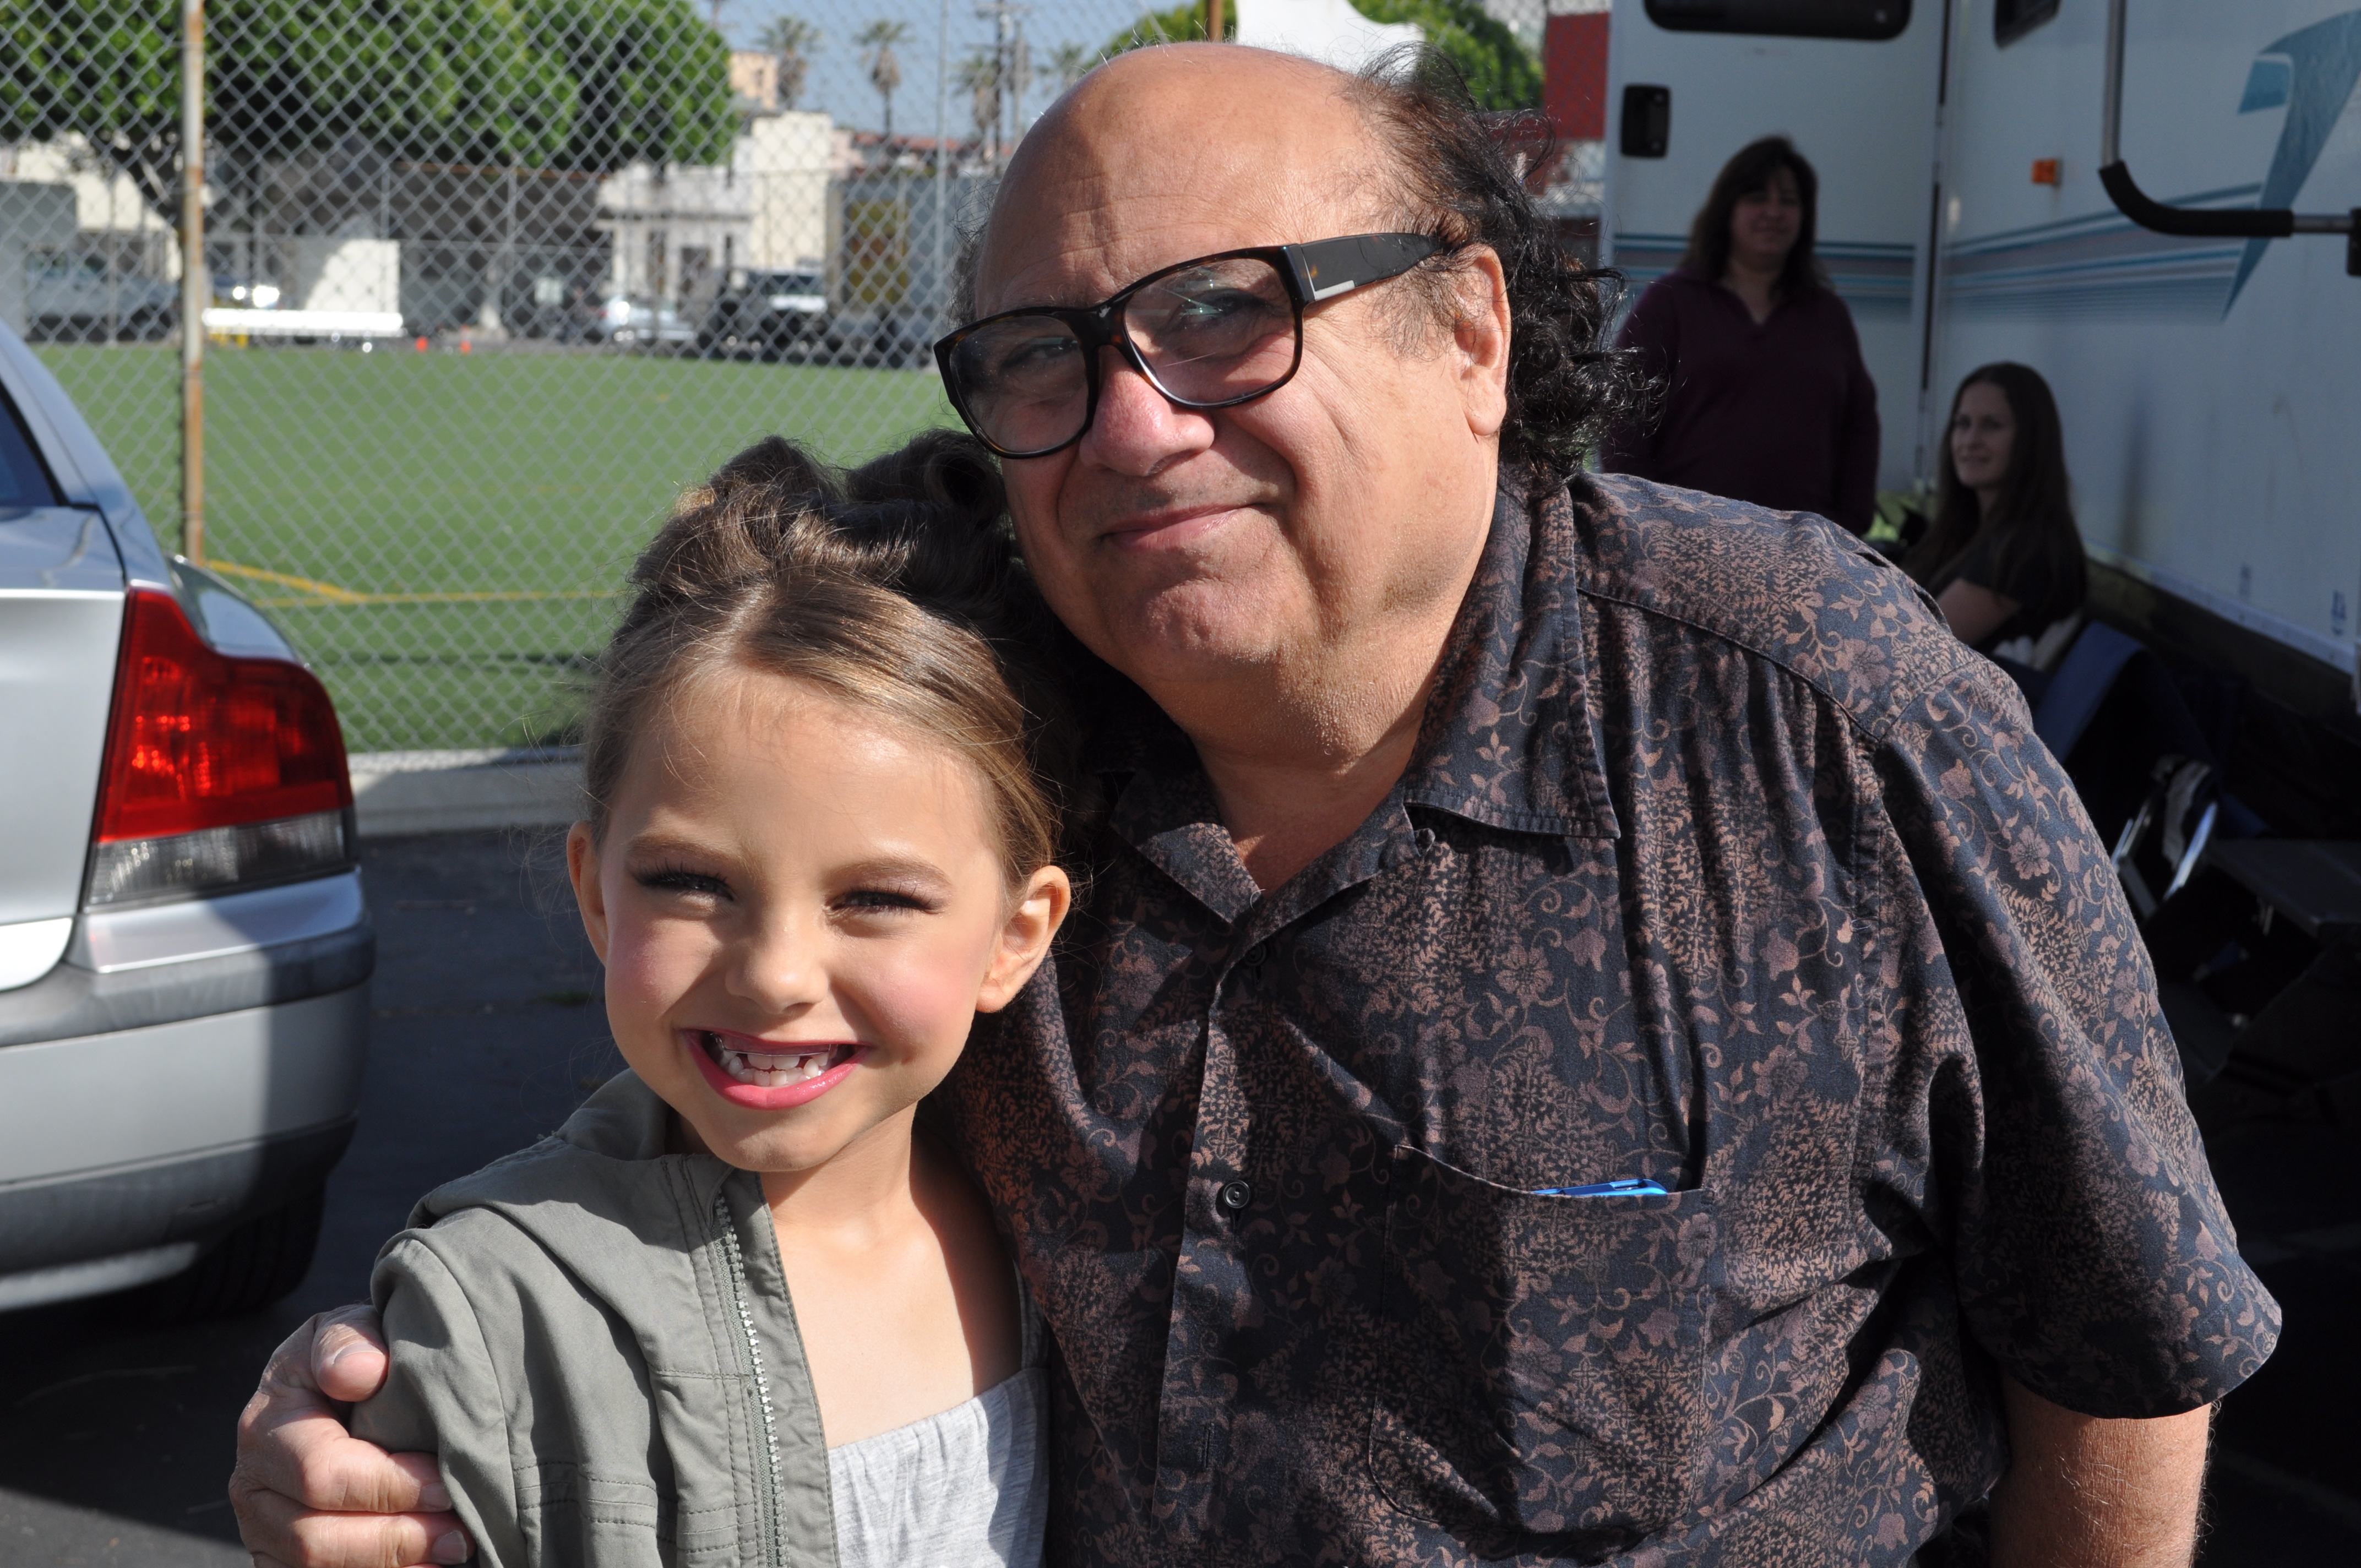 Caitlin Carmichael and Danny DeVito on set of 